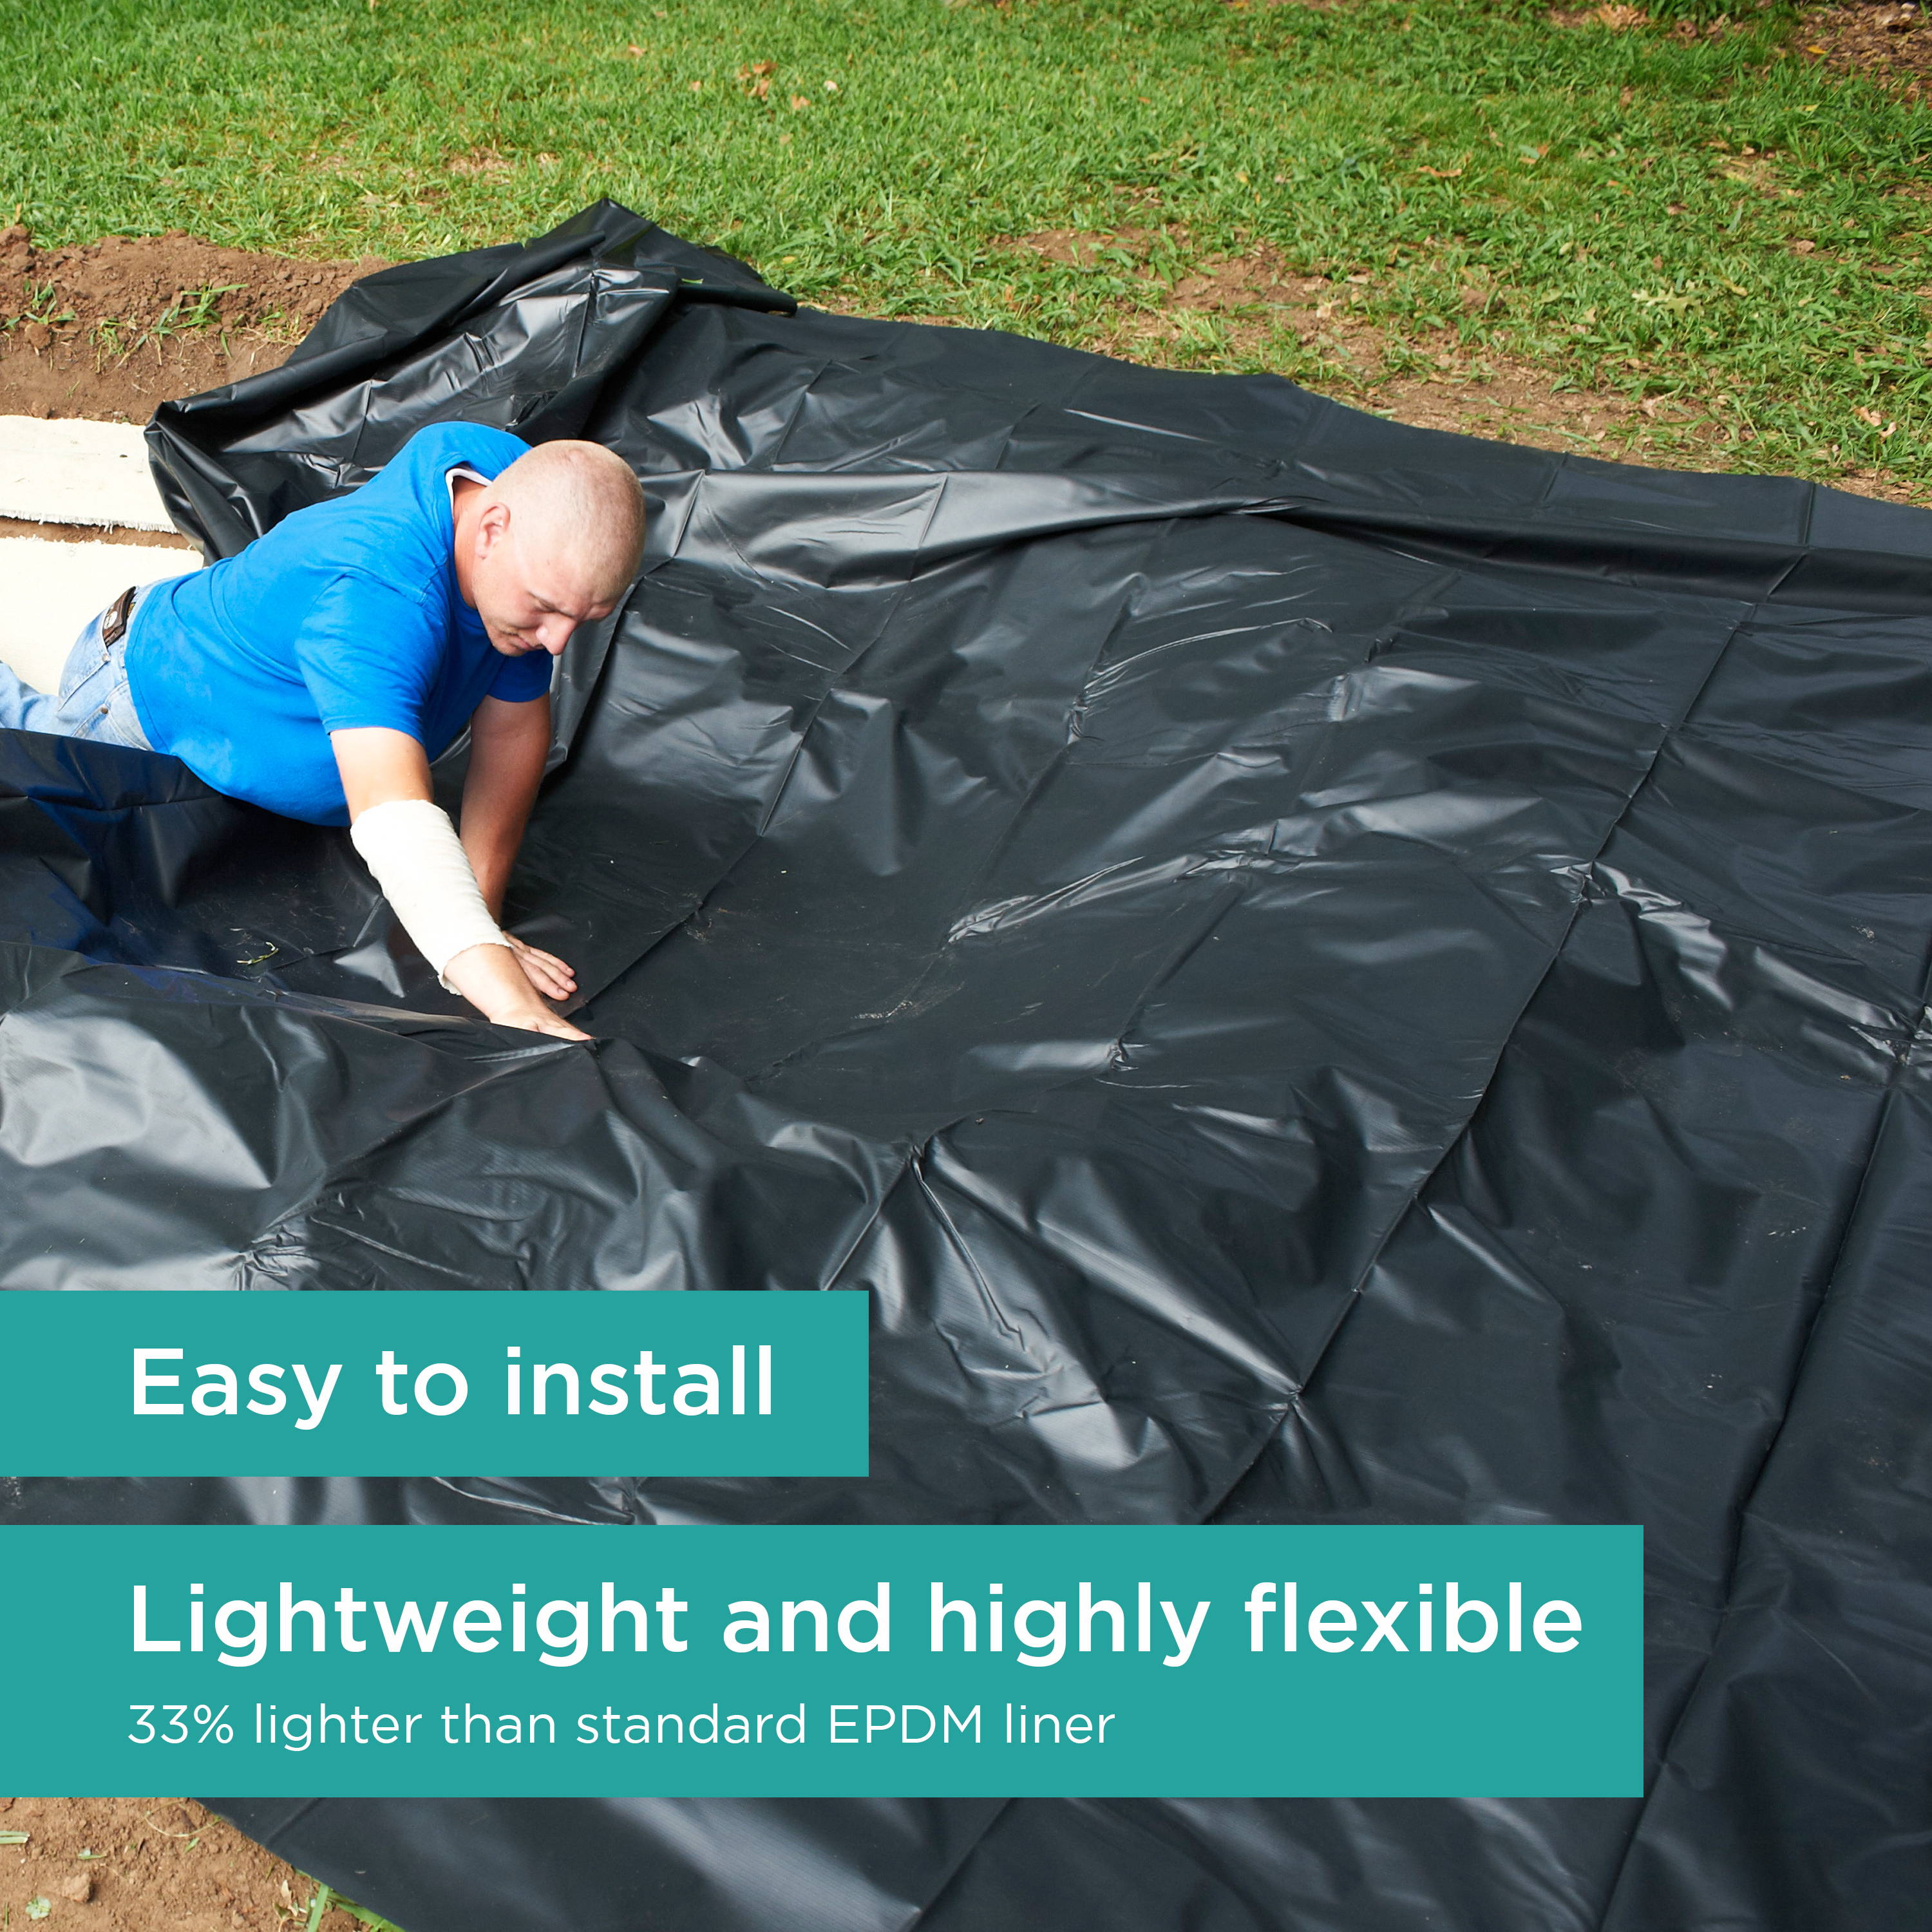 TotalPond pond liners are easy to install